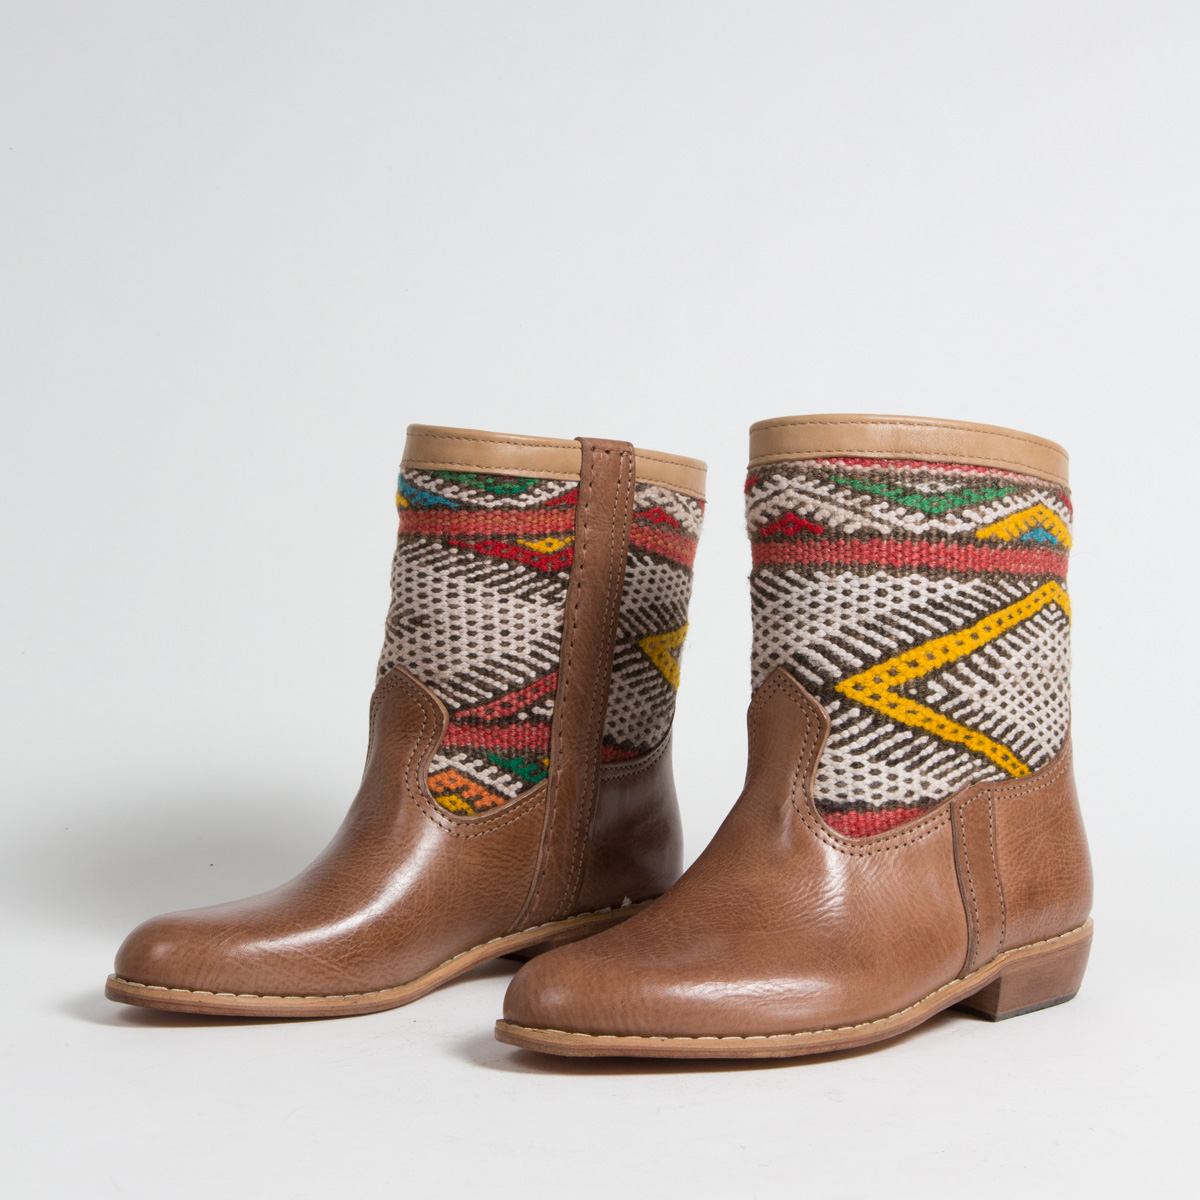 Bottines Kilim cuir mababouche artisanales (Réf. MCH3-38)